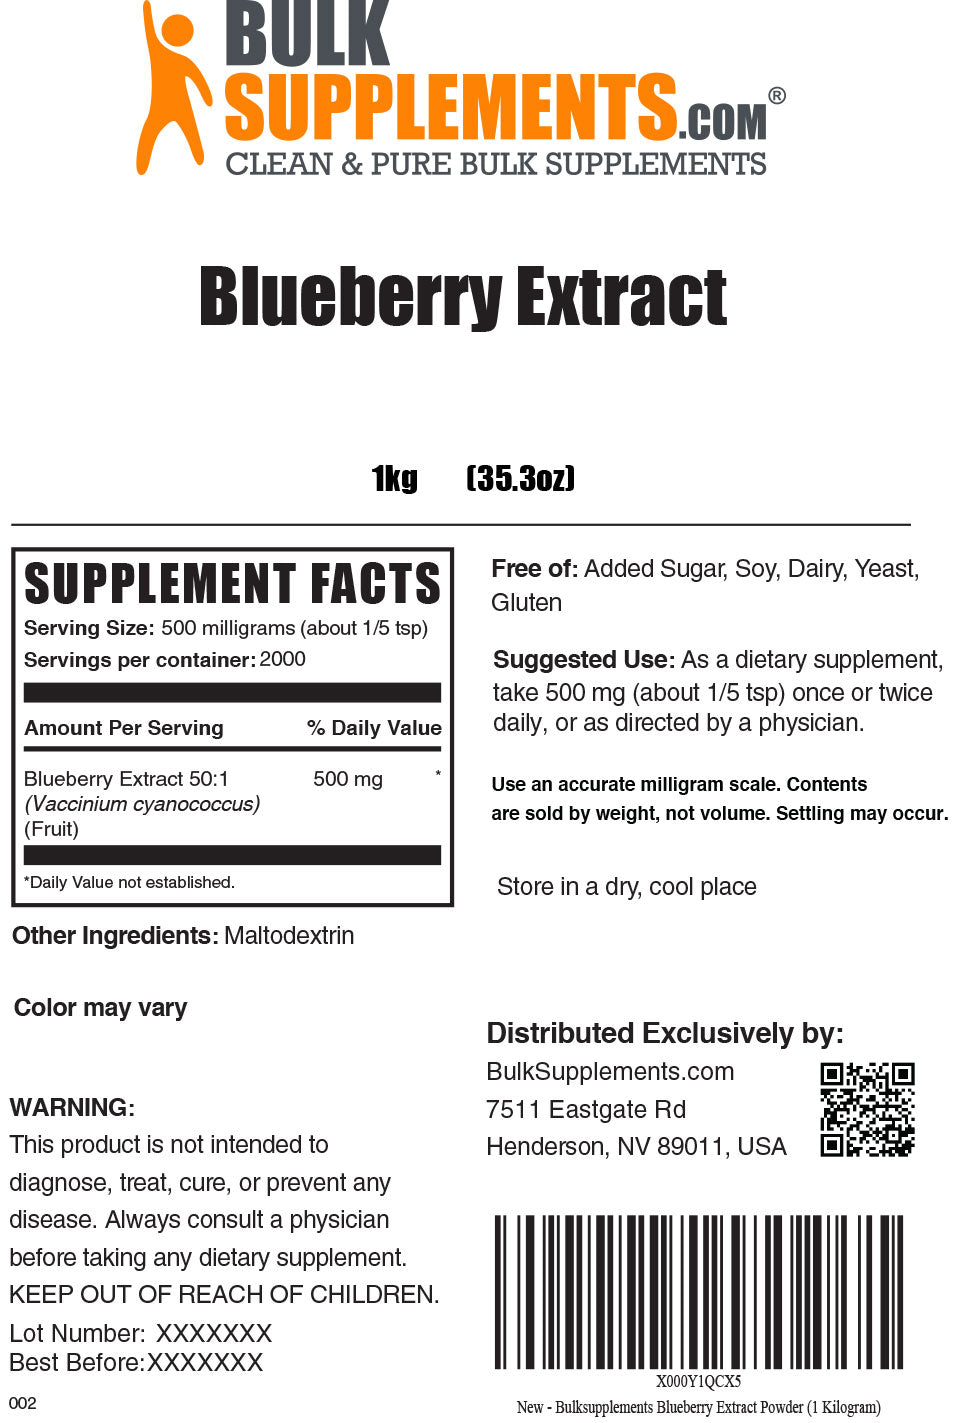 1kg of Blueberry Extract Supplement Facts